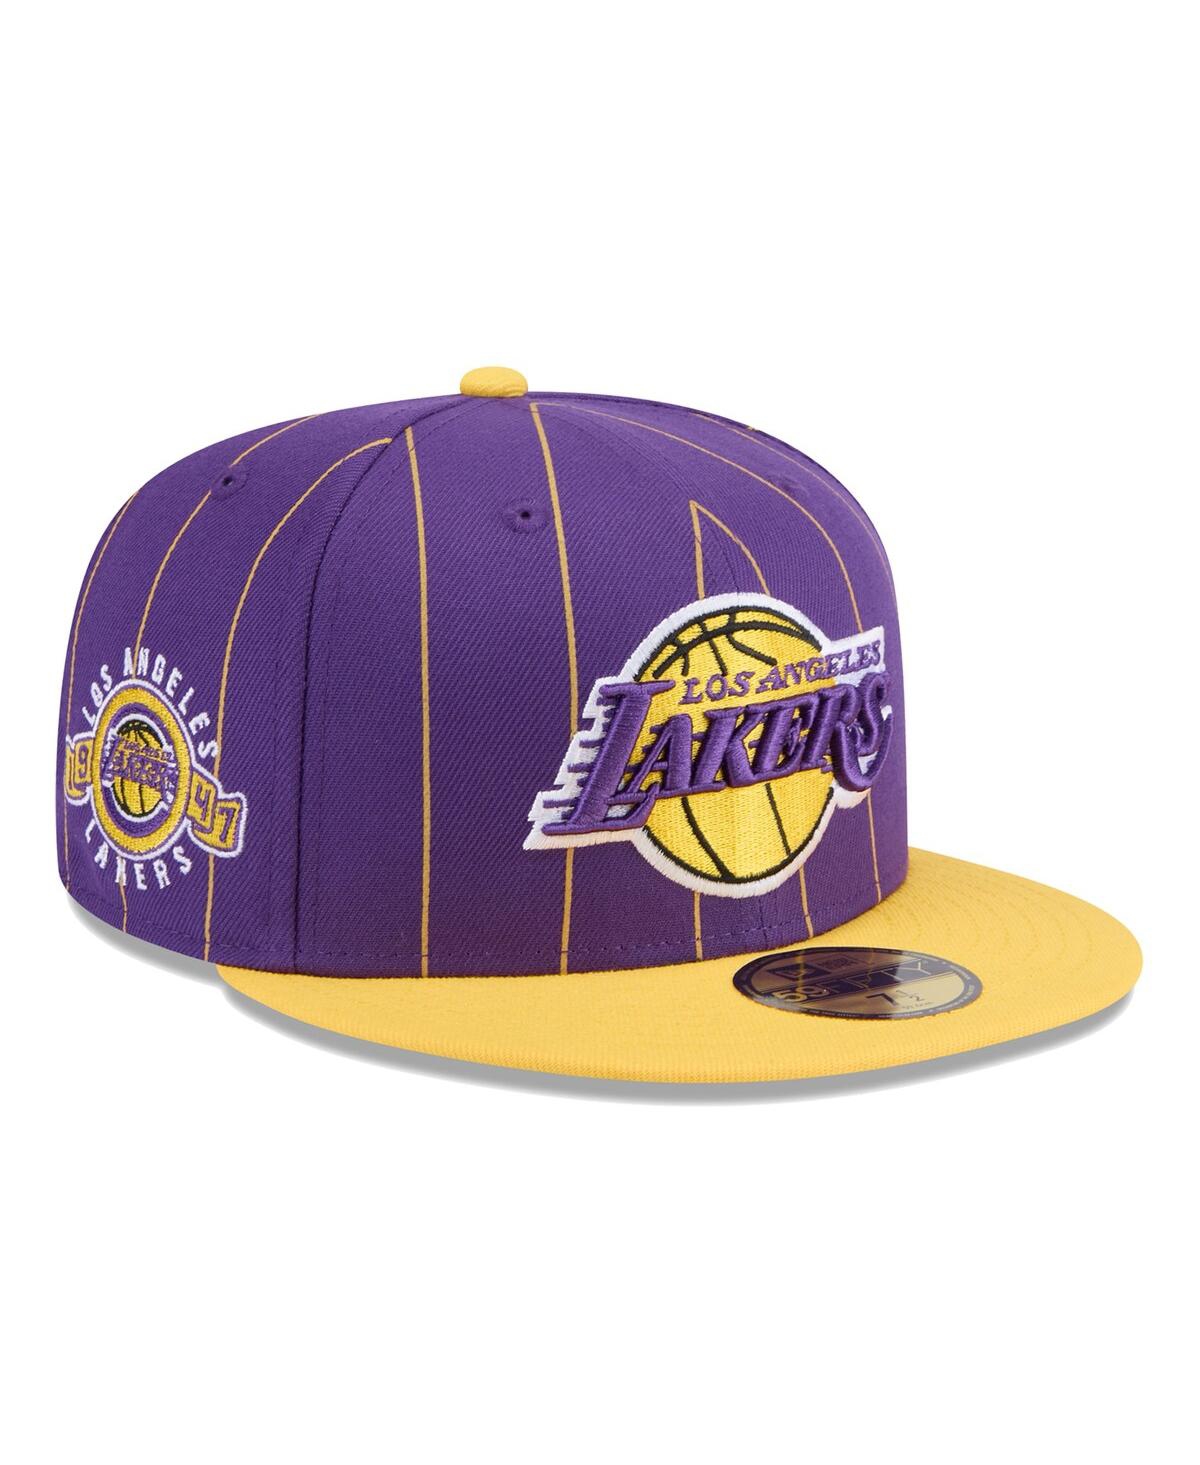 Men's Purple/Gold Los Angeles Lakers Pinstripe Two-Tone 59fifty Fitted Hat - Purple Gol